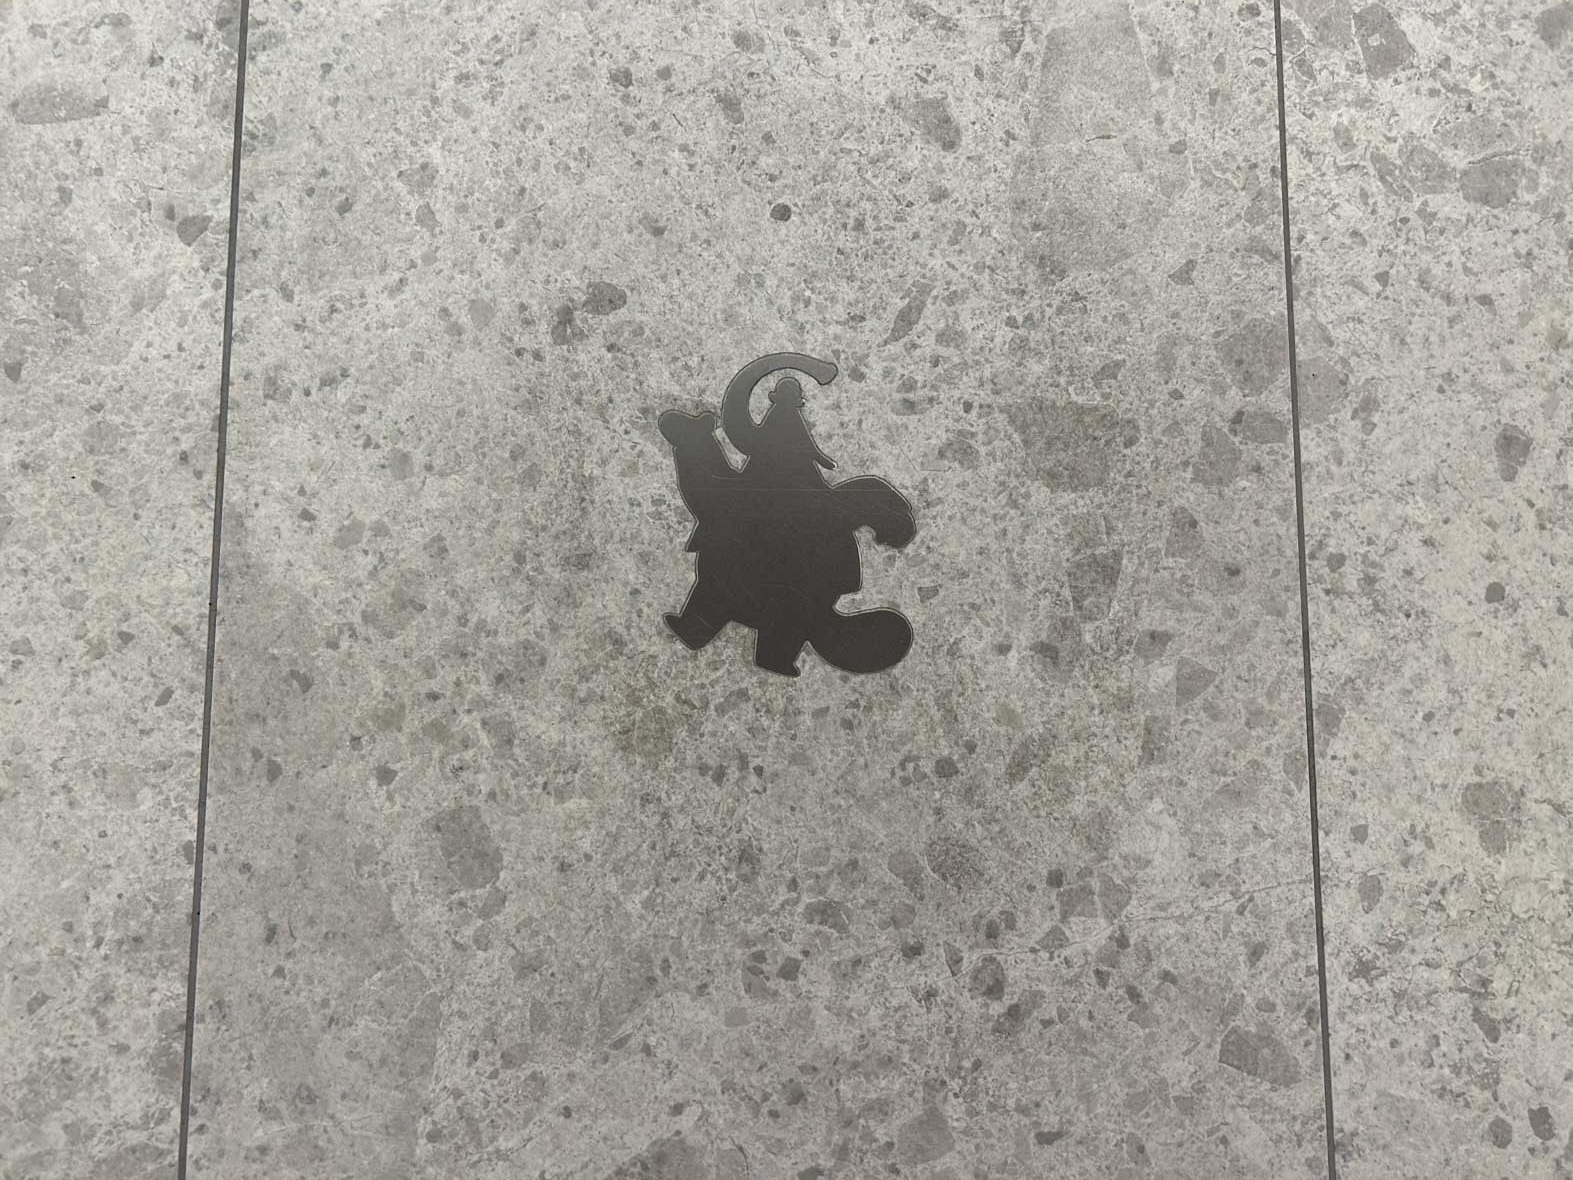 A metal, silver medallion in the shape of Bing Bong from Inside Out is inlaid in the gray floor of the Pixar Place Hotel.